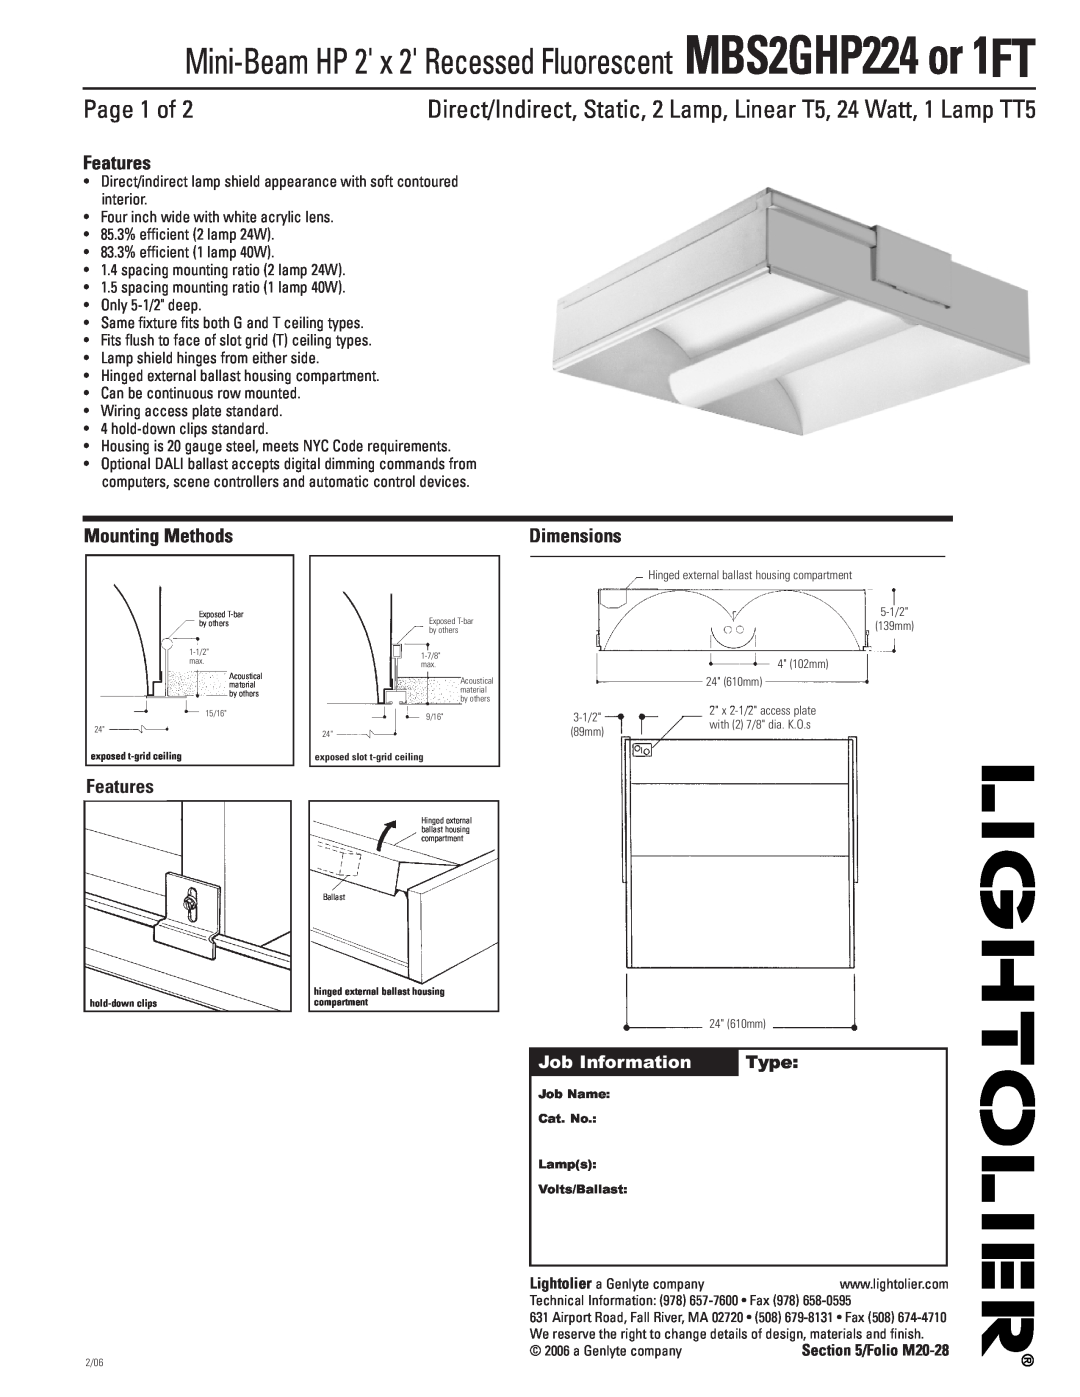 Lightolier MBS2GHP224, MBS2GHP1FT dimensions Page 1 of, Features, Mounting Methods, Dimensions, Job Information, Type 